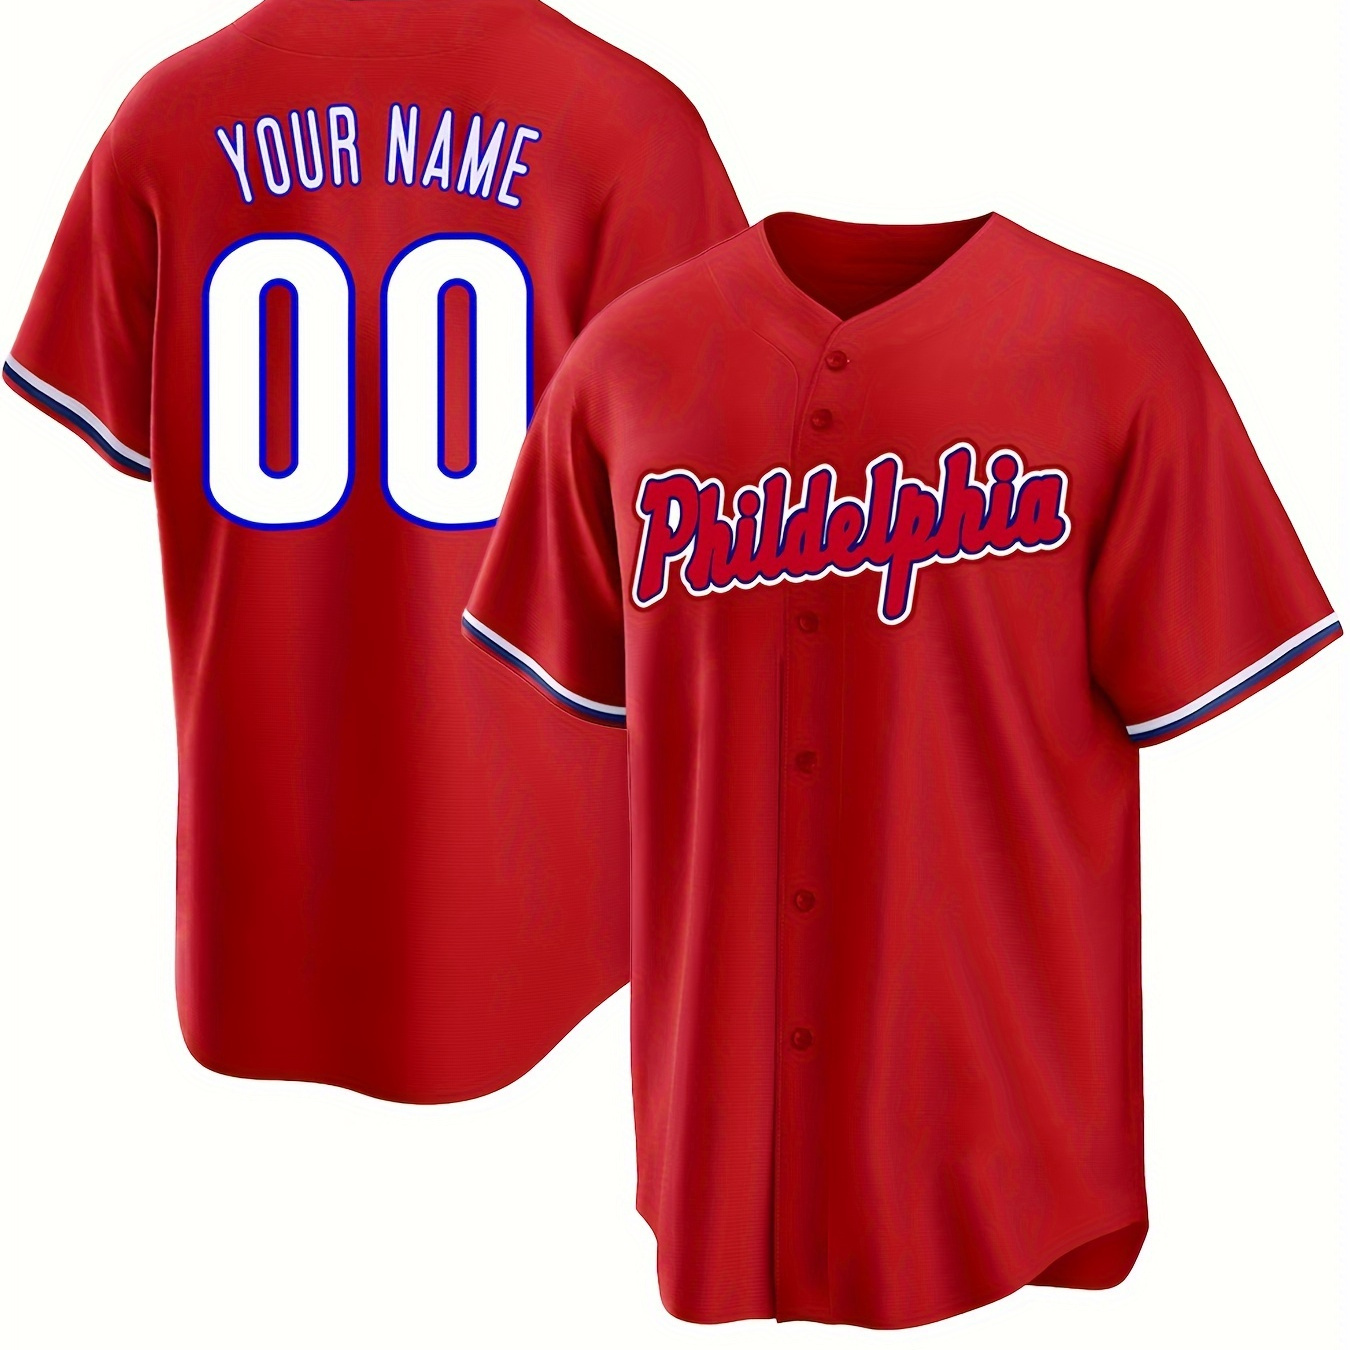 

Men's Short Sleeve Baseball Jersey With Letter And Number Embroidered Design For Training And Competition